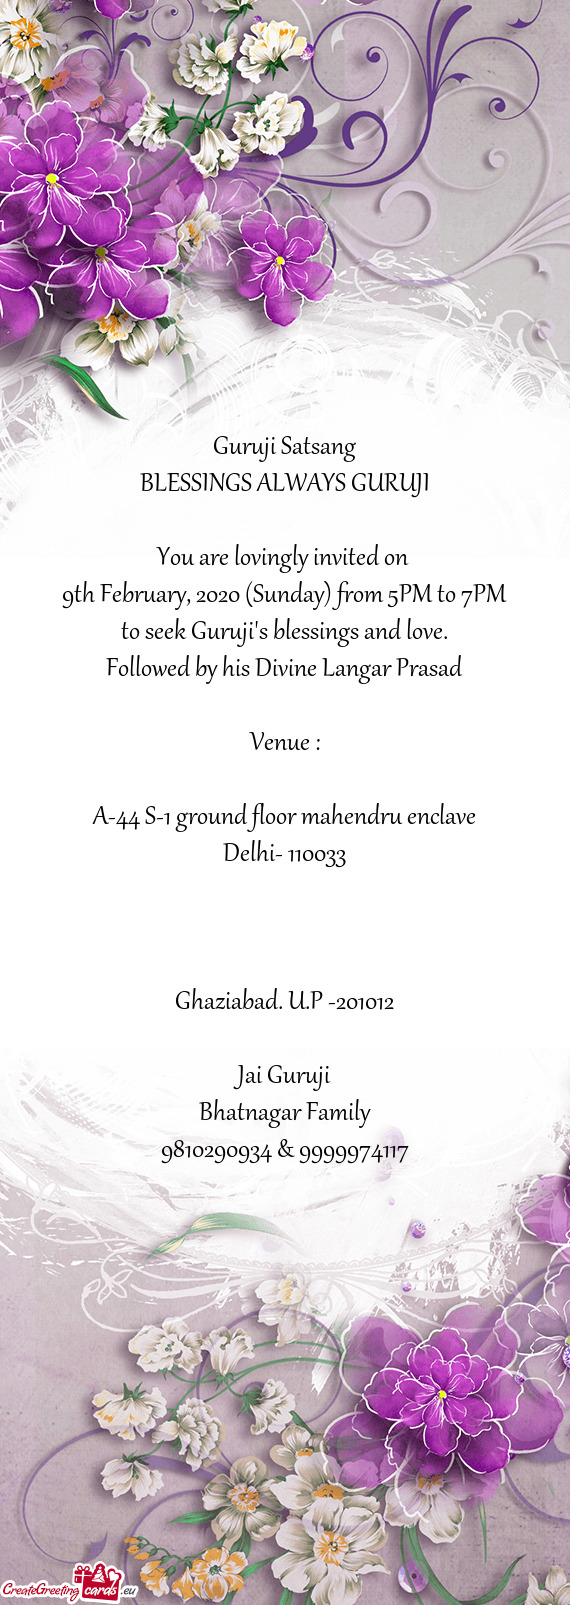 9th February, 2020 (Sunday) from 5PM to 7PM